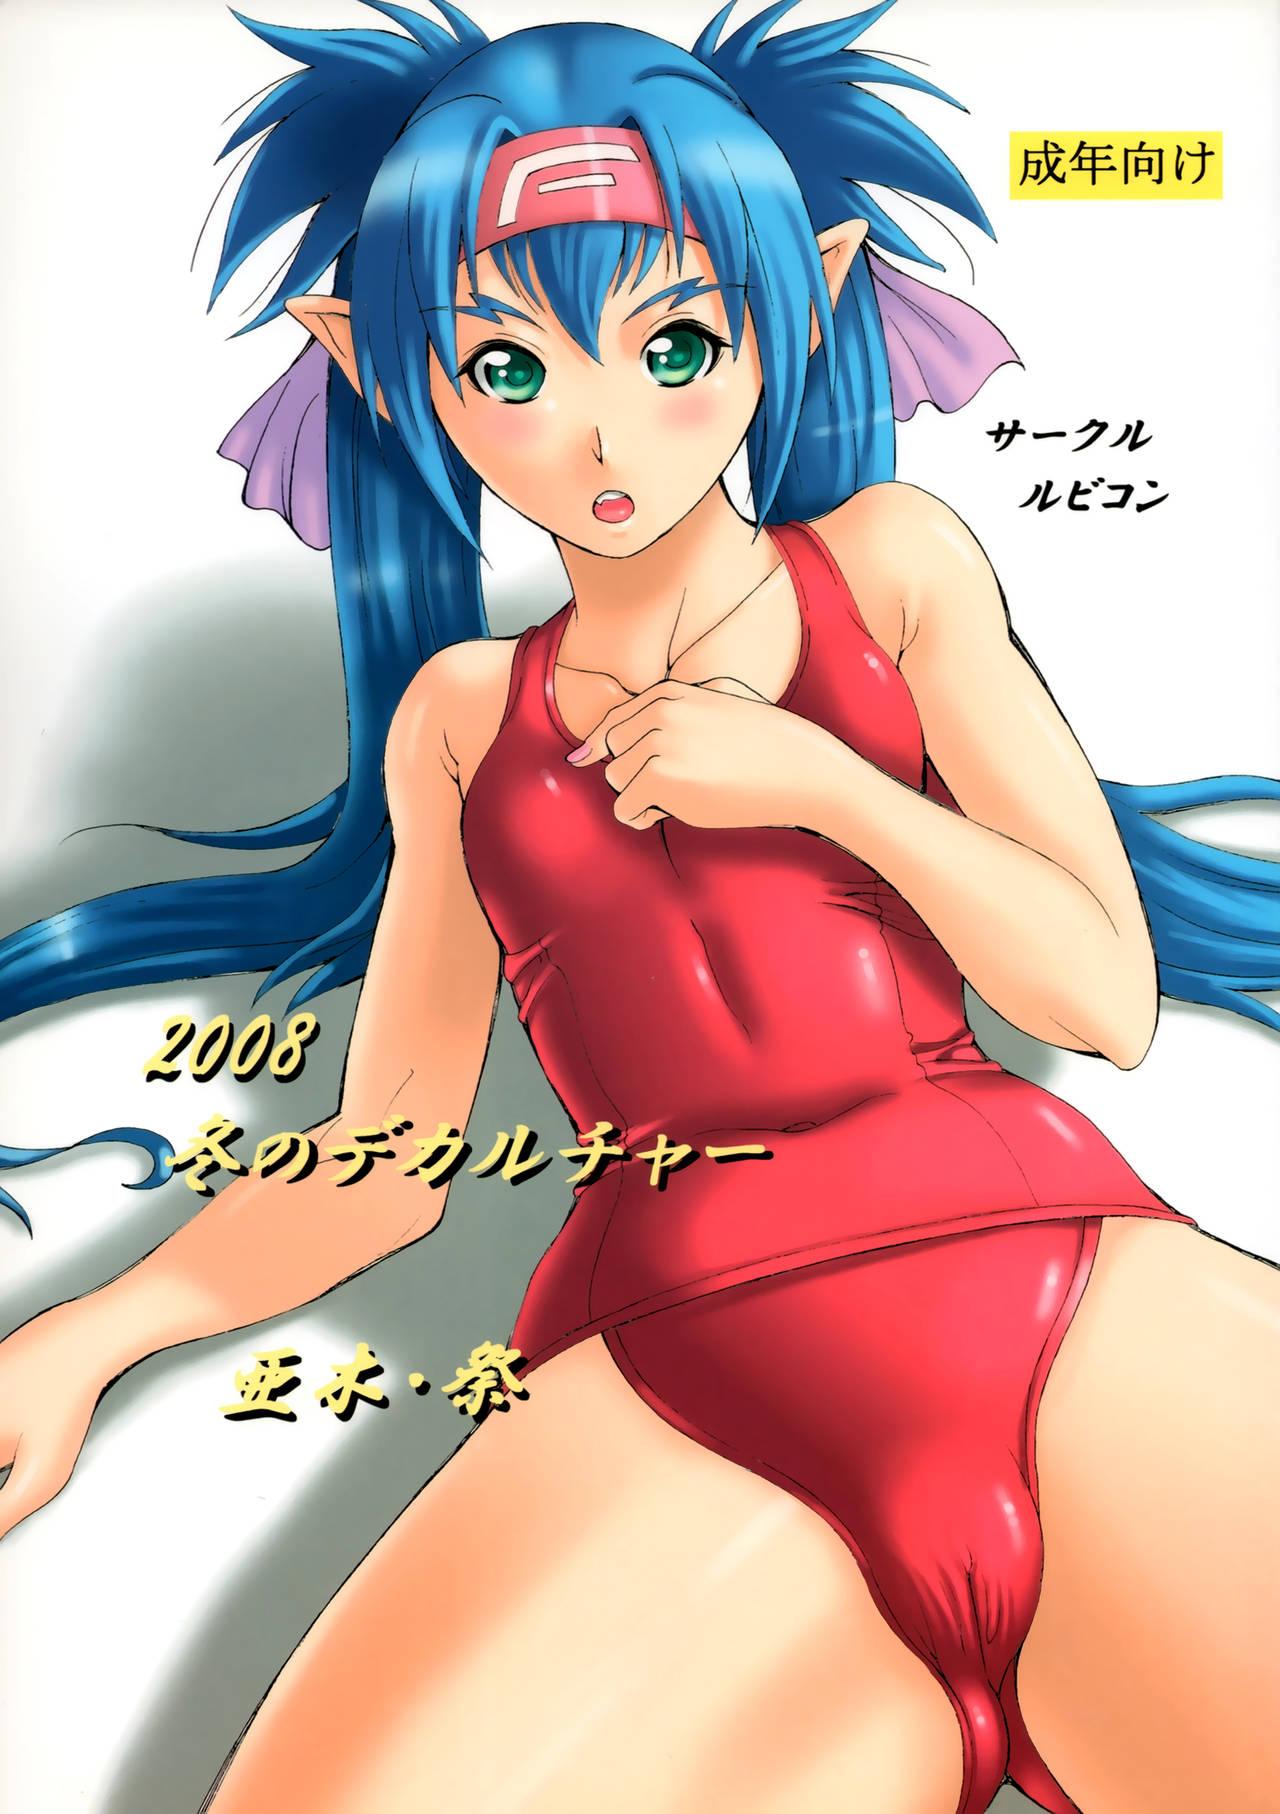 Spying 2008 Fuyu no Deculture - Macross frontier Exhibitionist - Picture 1